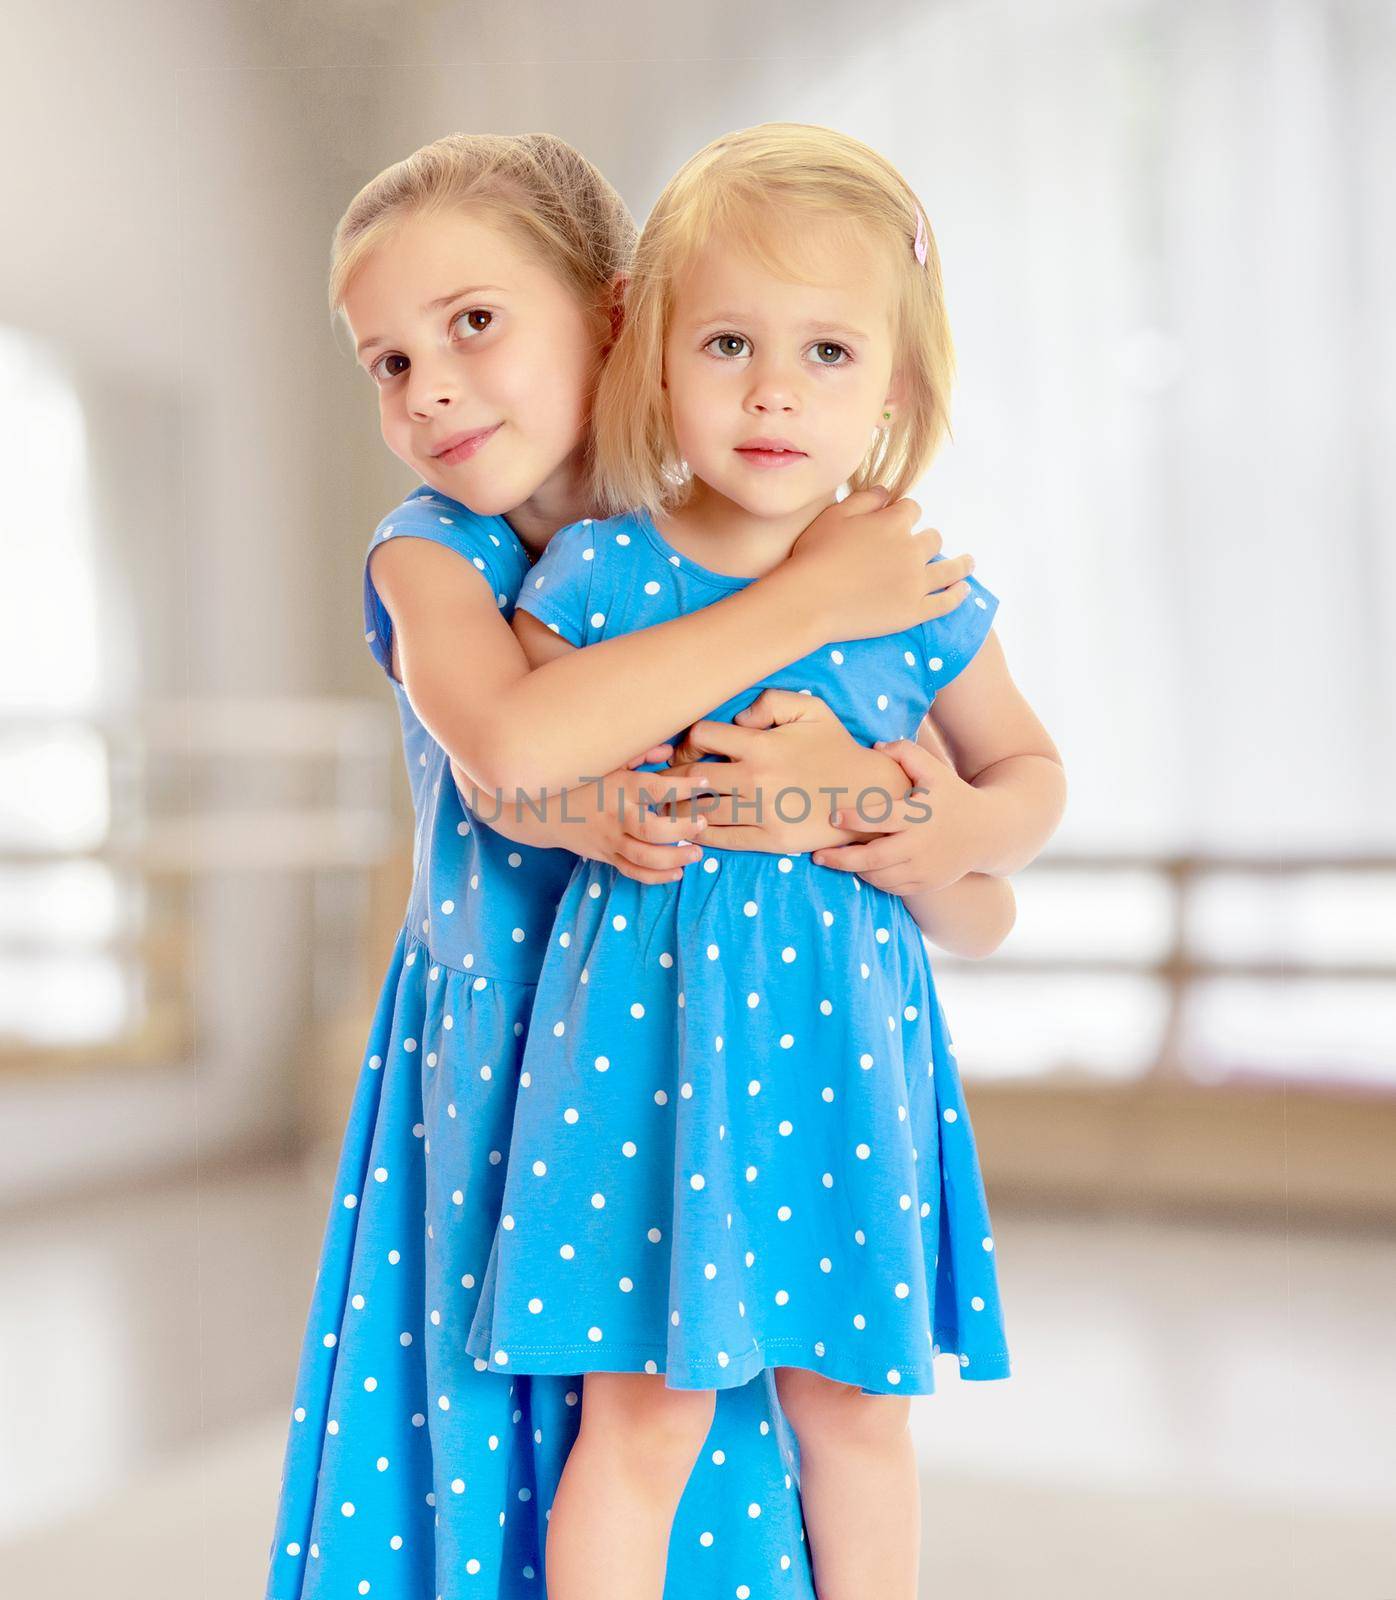 Two charming little girls, sisters , in identical blue dresses with polka dots , cuddling.